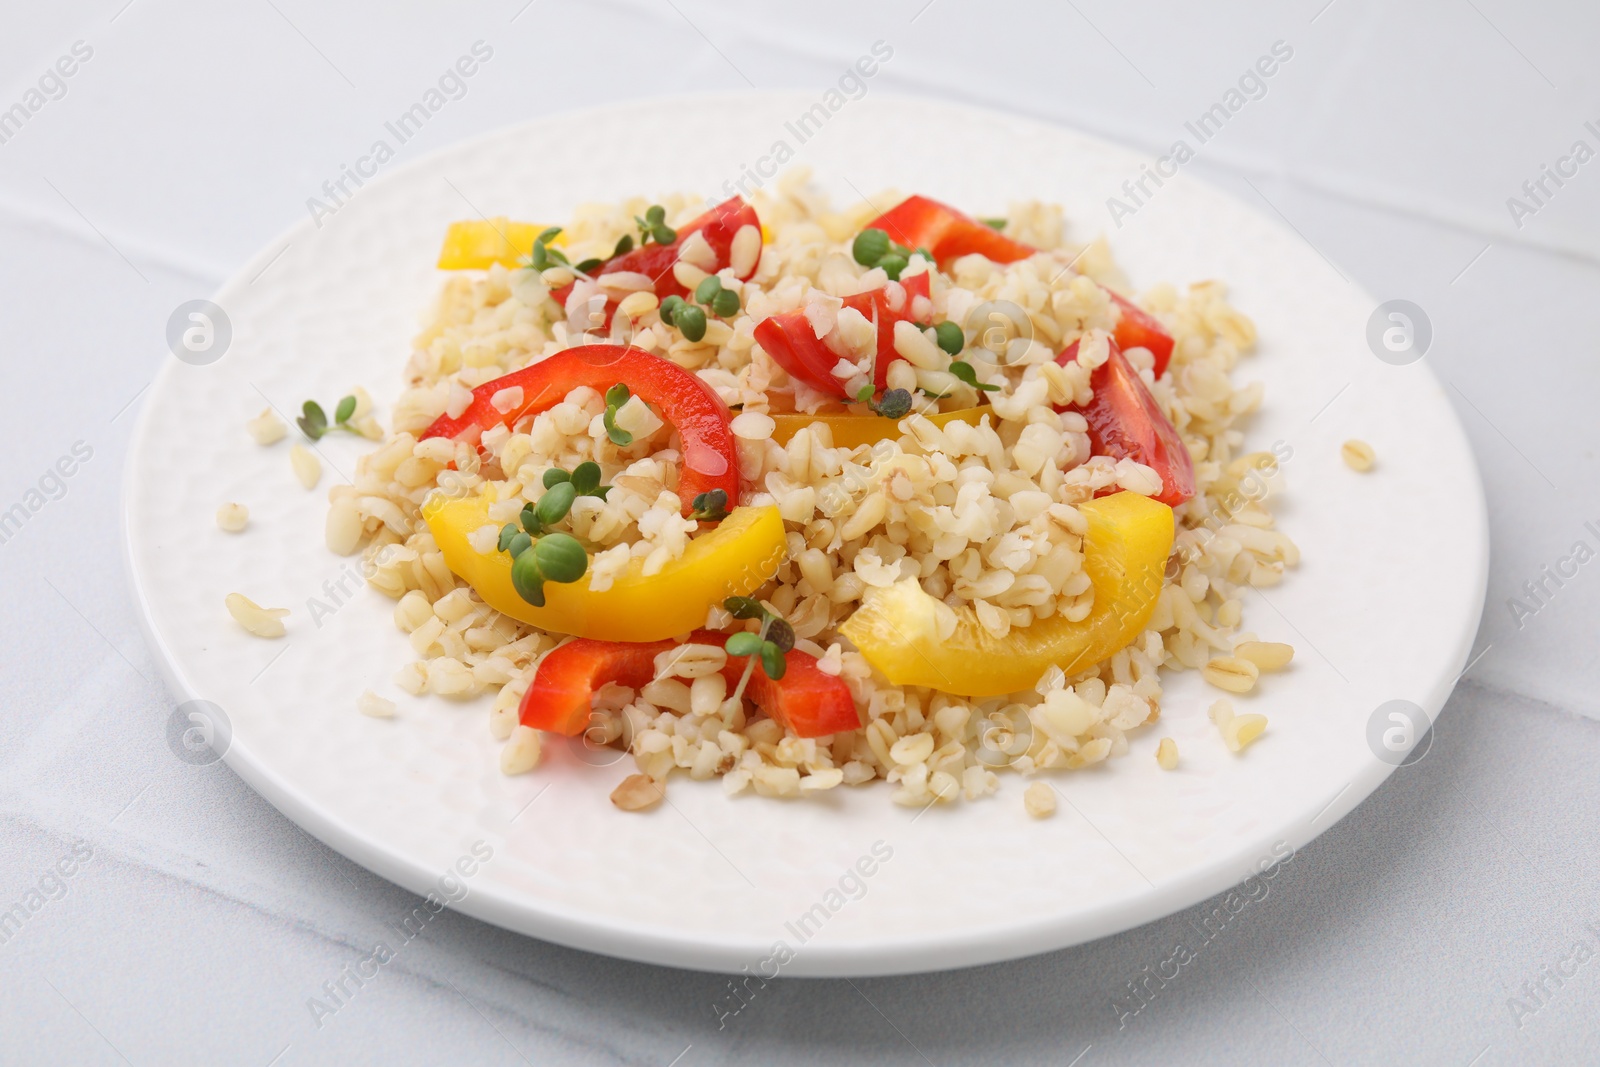 Photo of Plate of cooked bulgur with vegetables on white tiled table